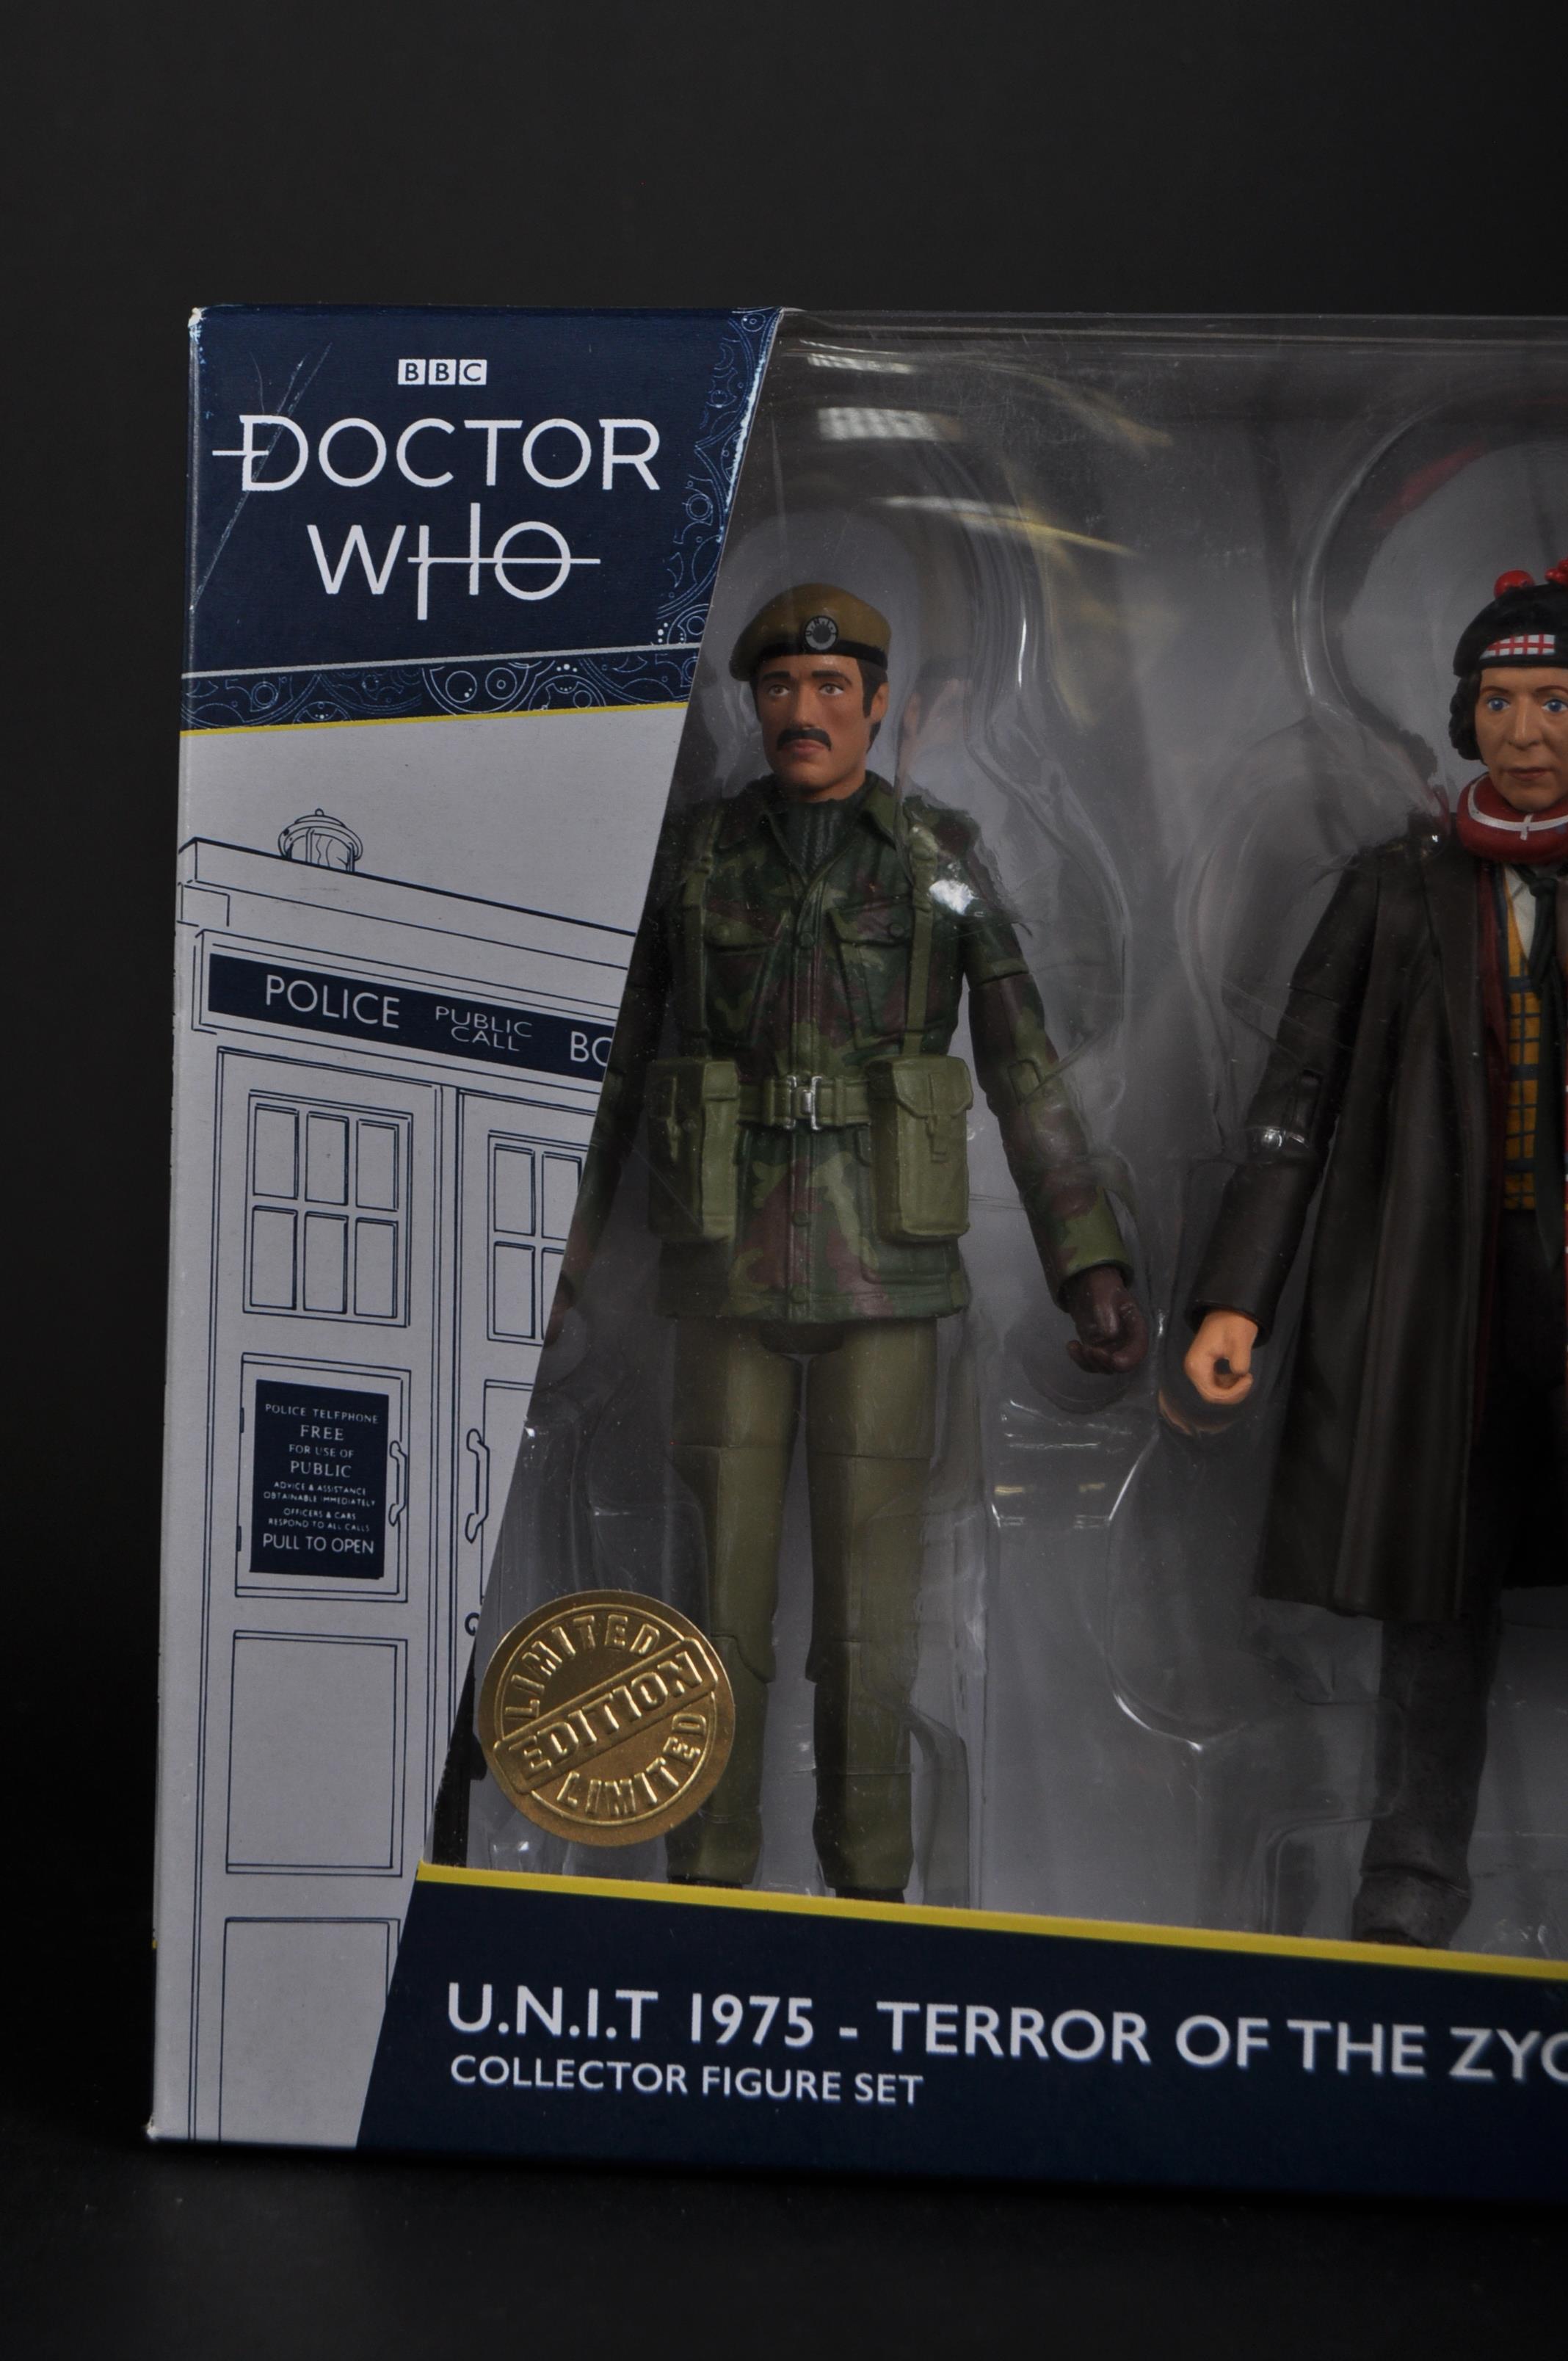 DOCTOR WHO - TERROR OF THE ZYGONS AUTOGRAPHED ACTION FIGURE SET - Image 4 of 5